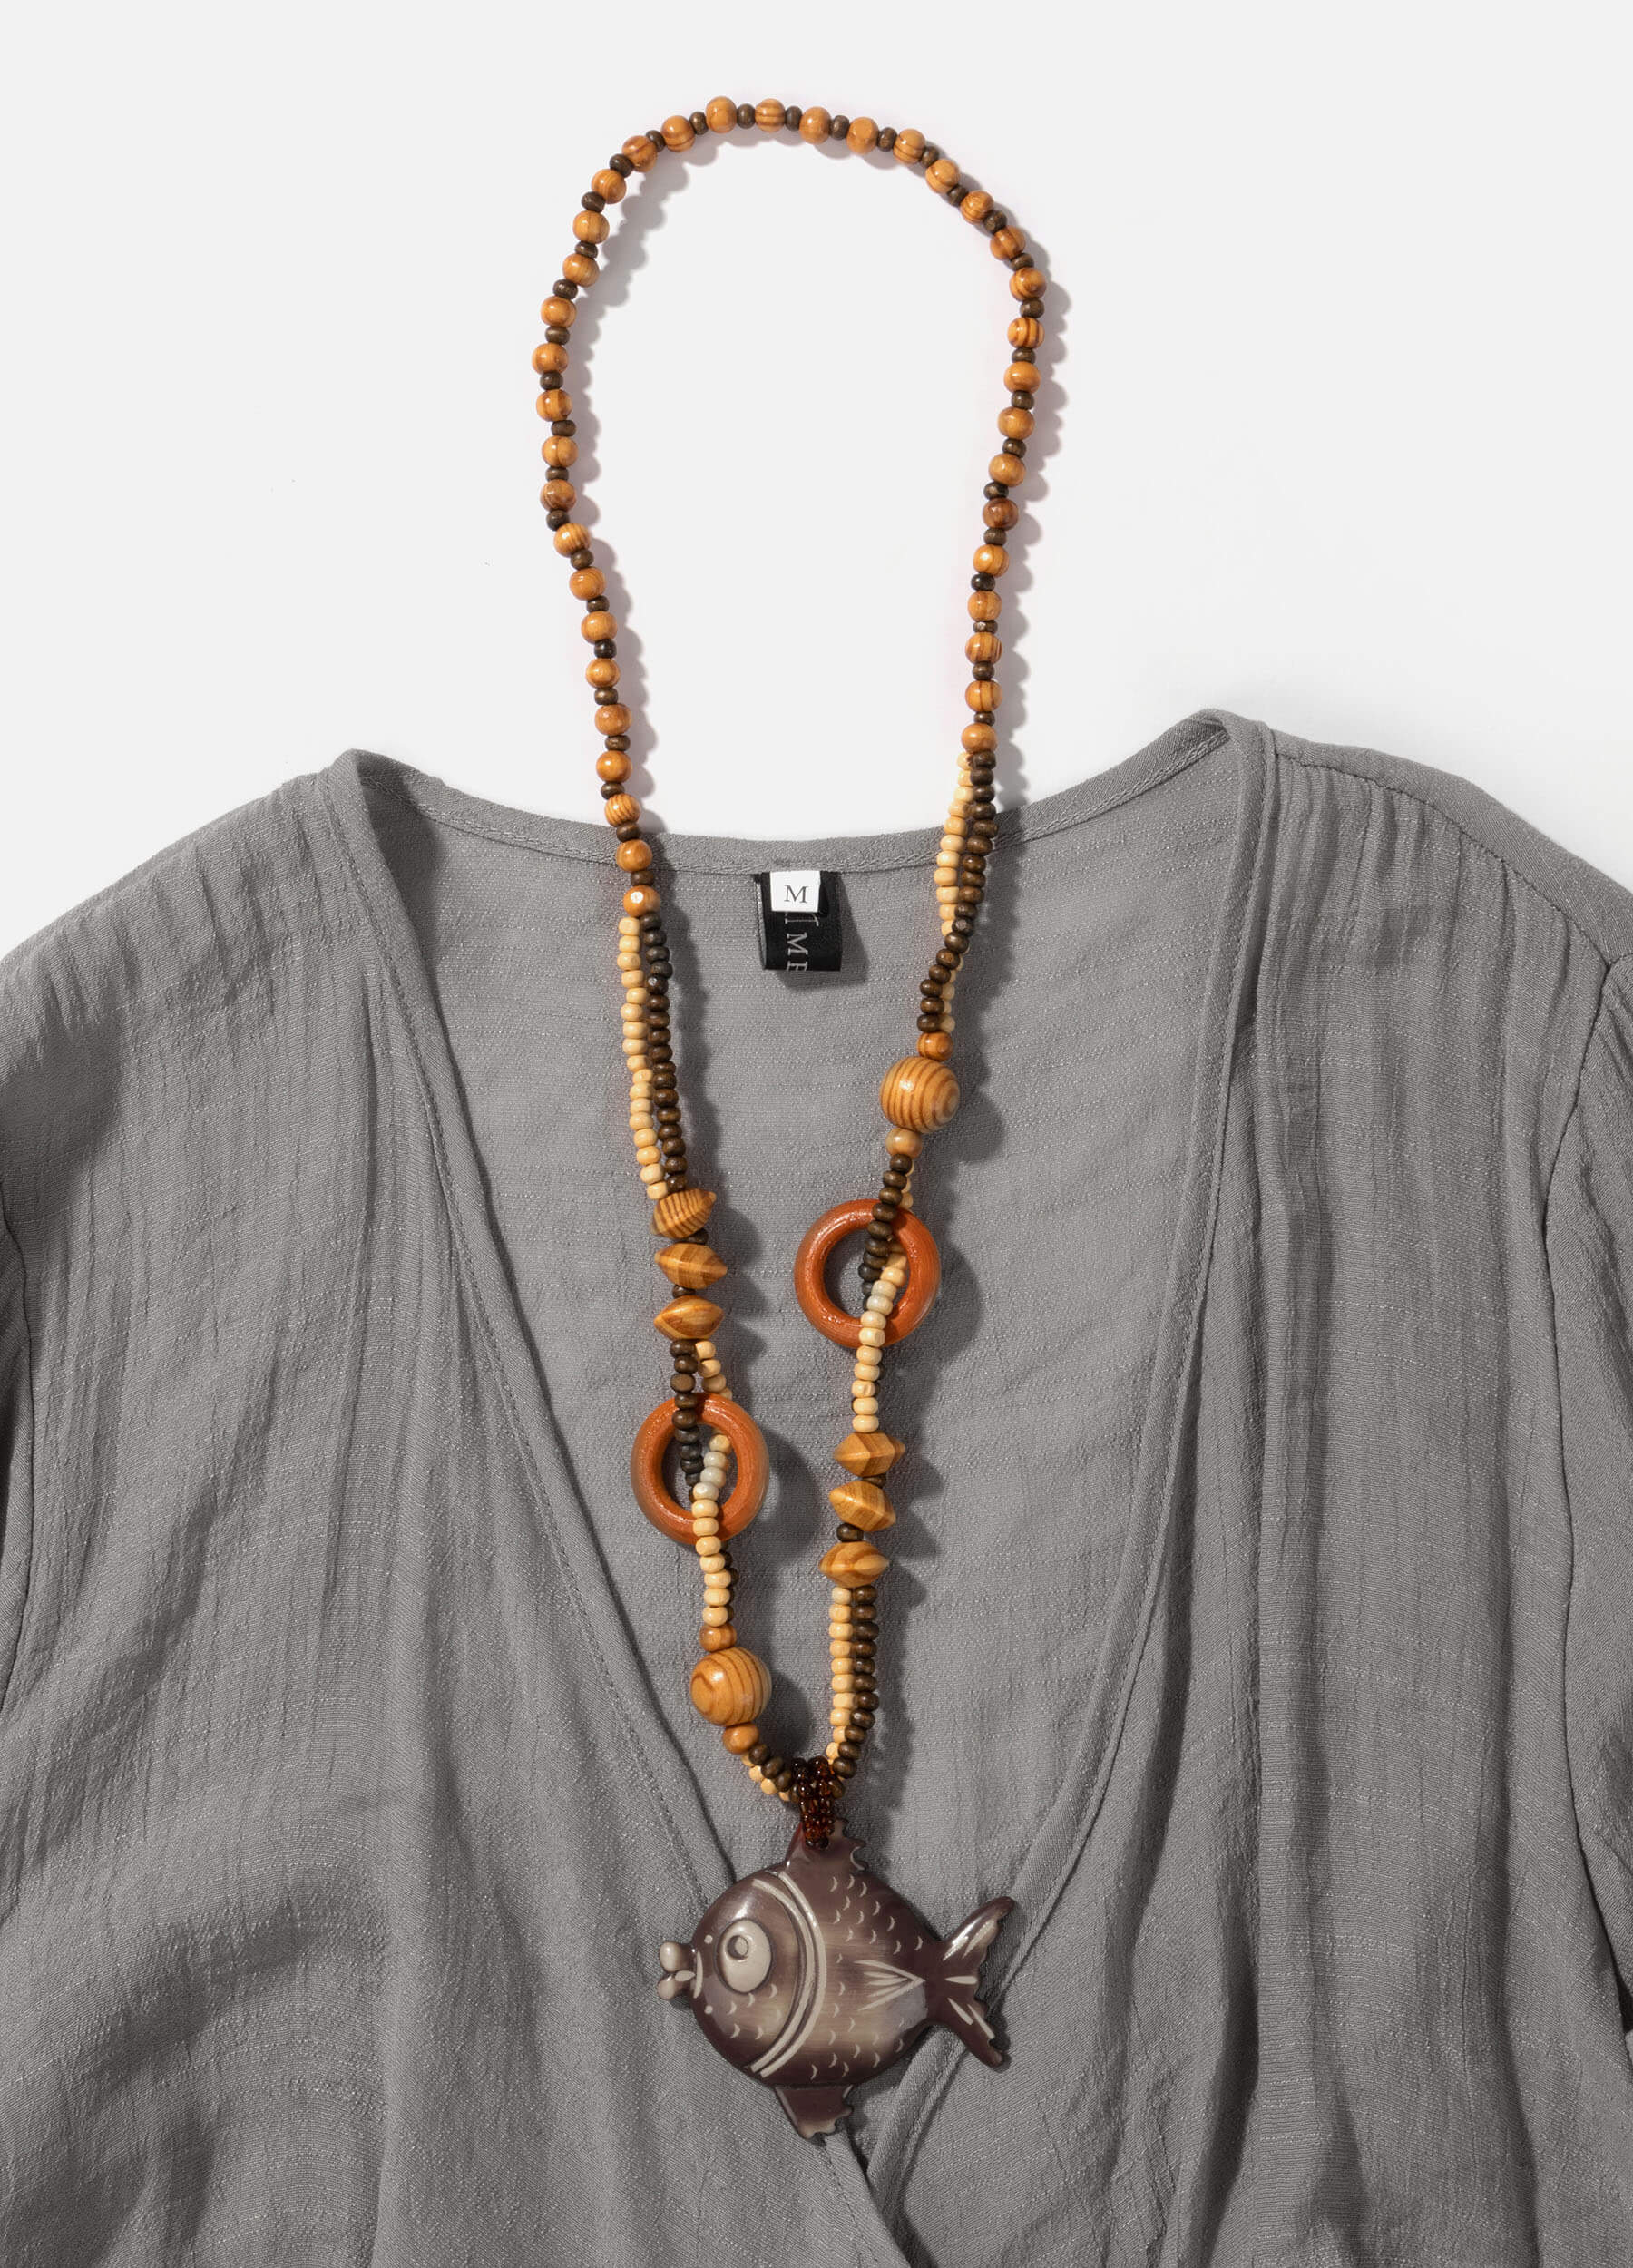 MECALA Women's Solid Linen Grey Cardigan Dress with Wooden Fish Necklace